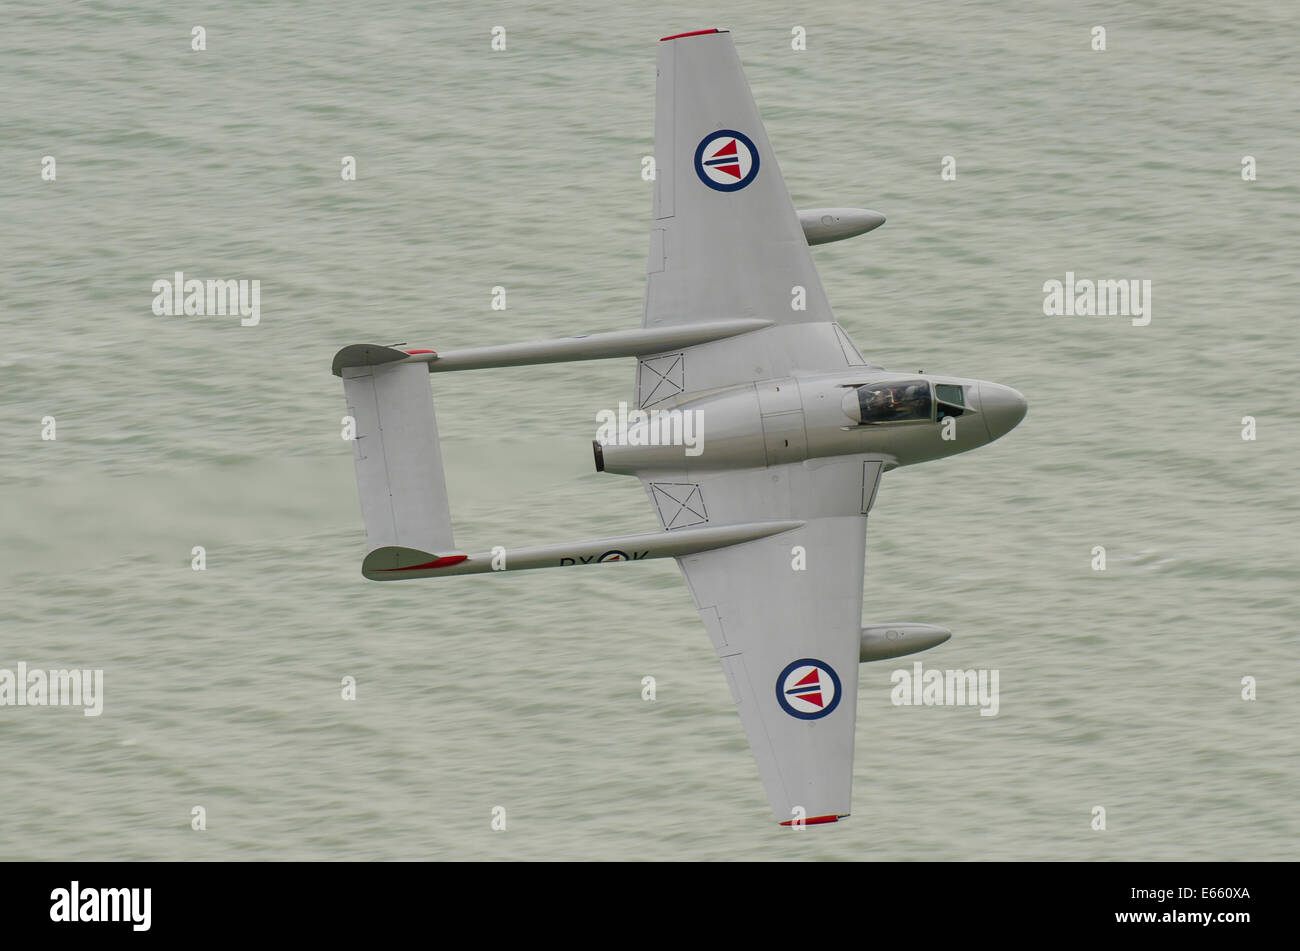 de Havilland Vampire at 'Airbourne' - the Eastbourne Airshow, Norwegian Air Force historic vintage classic jet plane over sea water Stock Photo